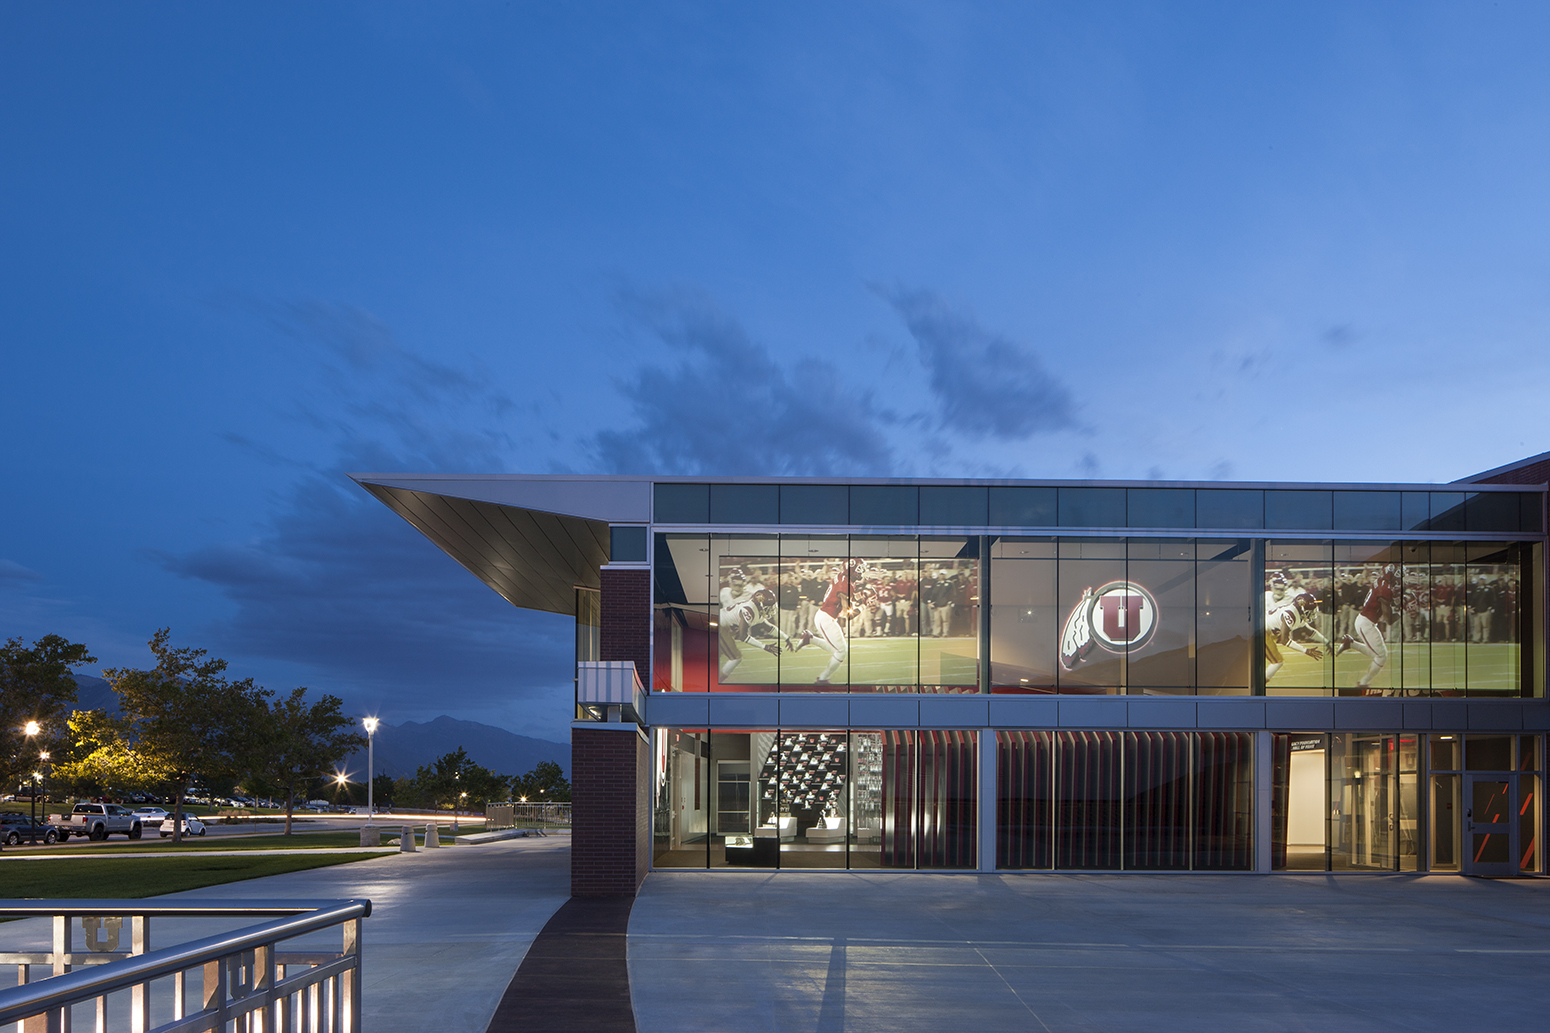 Spence and Cleone Eccles Football Center for VCBO ArchitectsArchitectural Photography by: Paul Richer / RICHER IMAGES